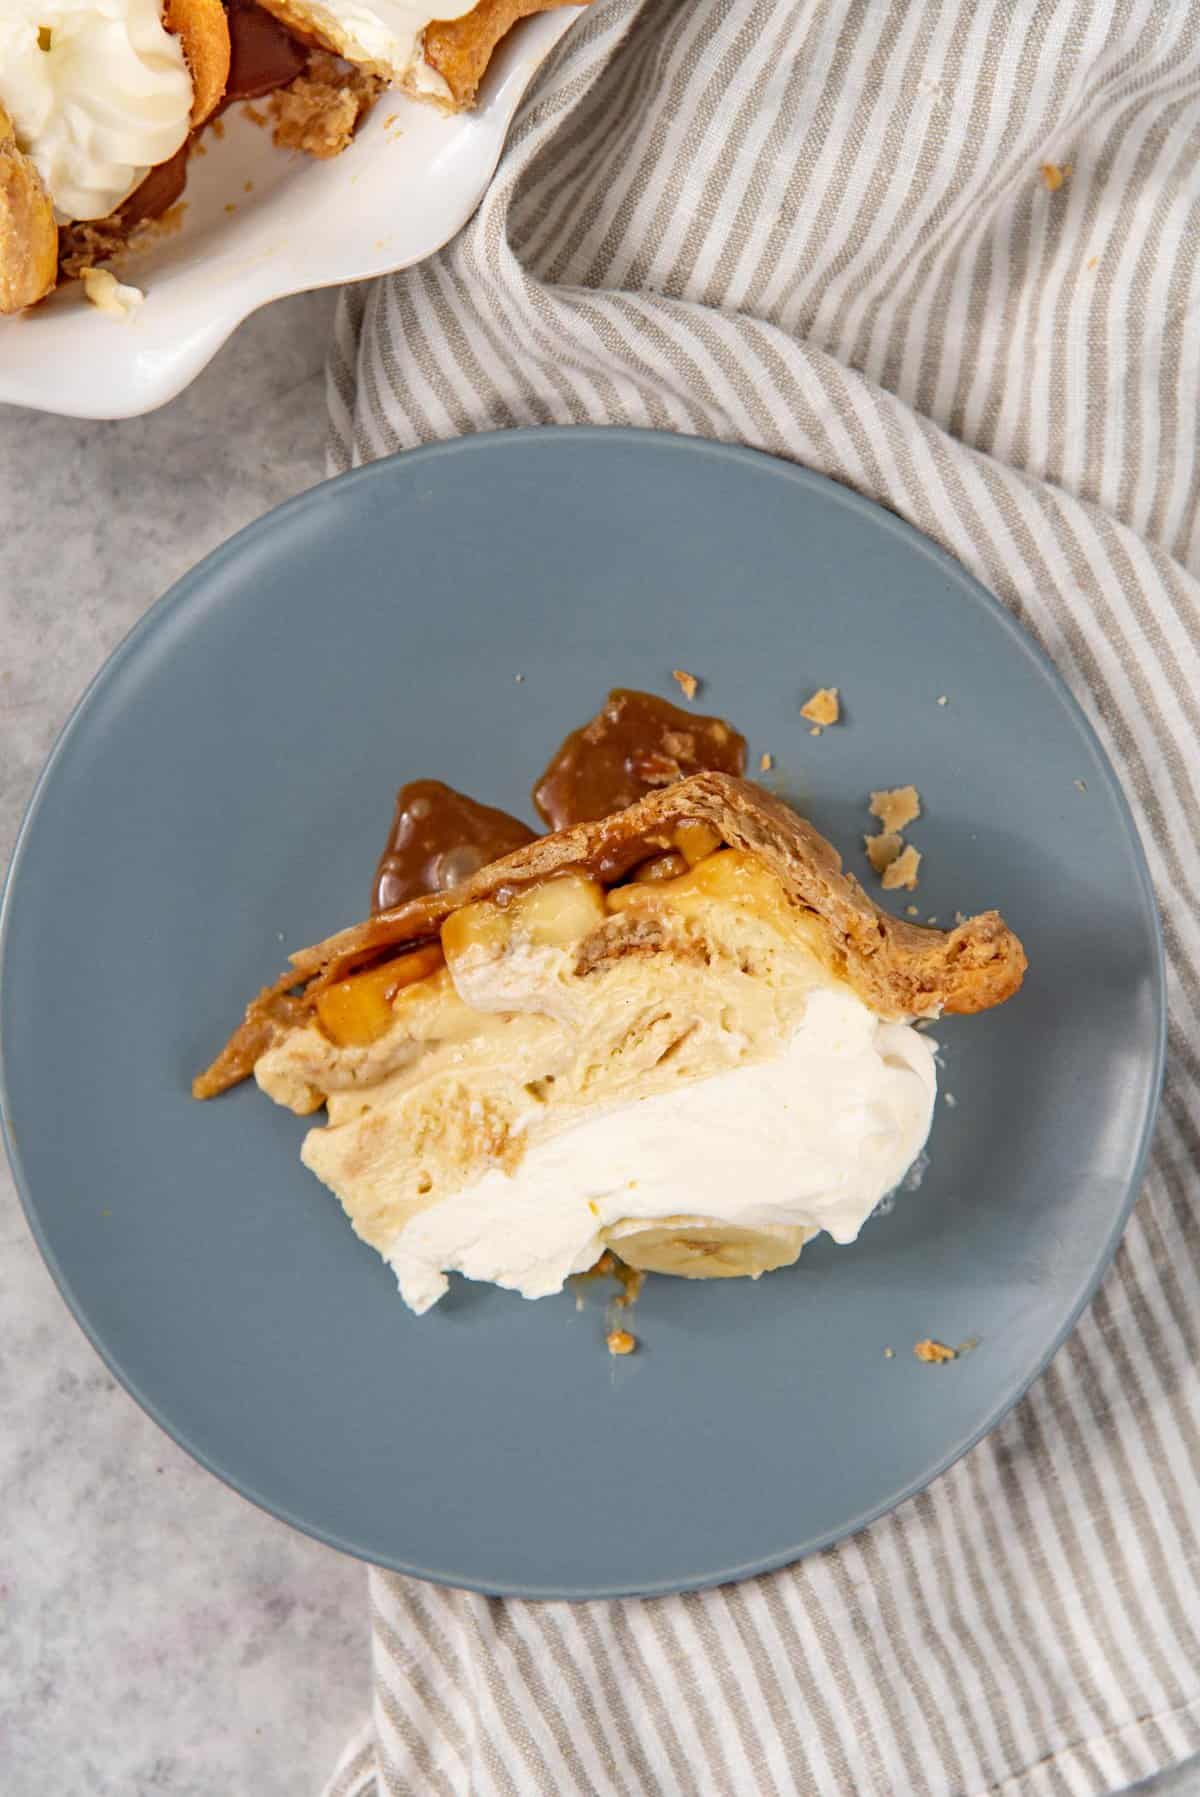 An overhead view of the banana cream pie slice, laid on its side, showing the caramel layer, banana layers, layers of banana pudding with wafers and whipped cream topping.